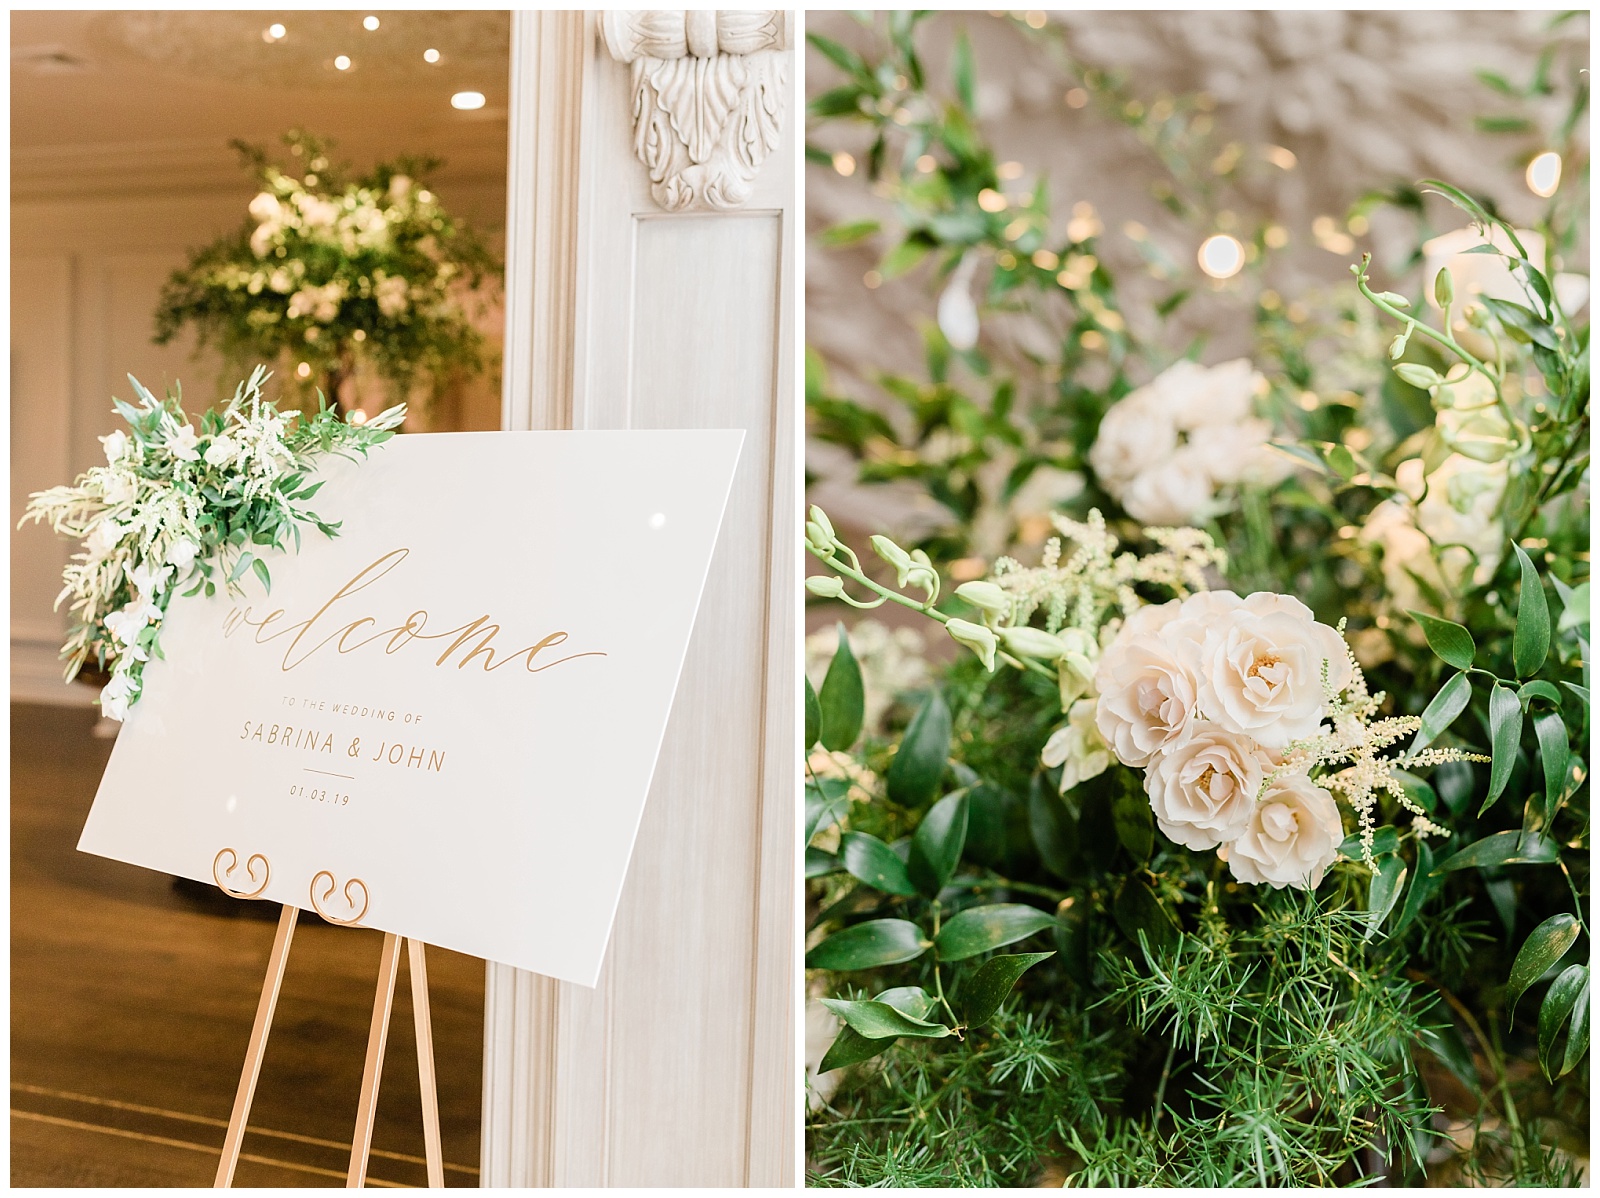 Park Chateau Wedding, Photographer, New Jersey, NJ, Winter, Reception Details, Welcome Sign, Florals, Greenery